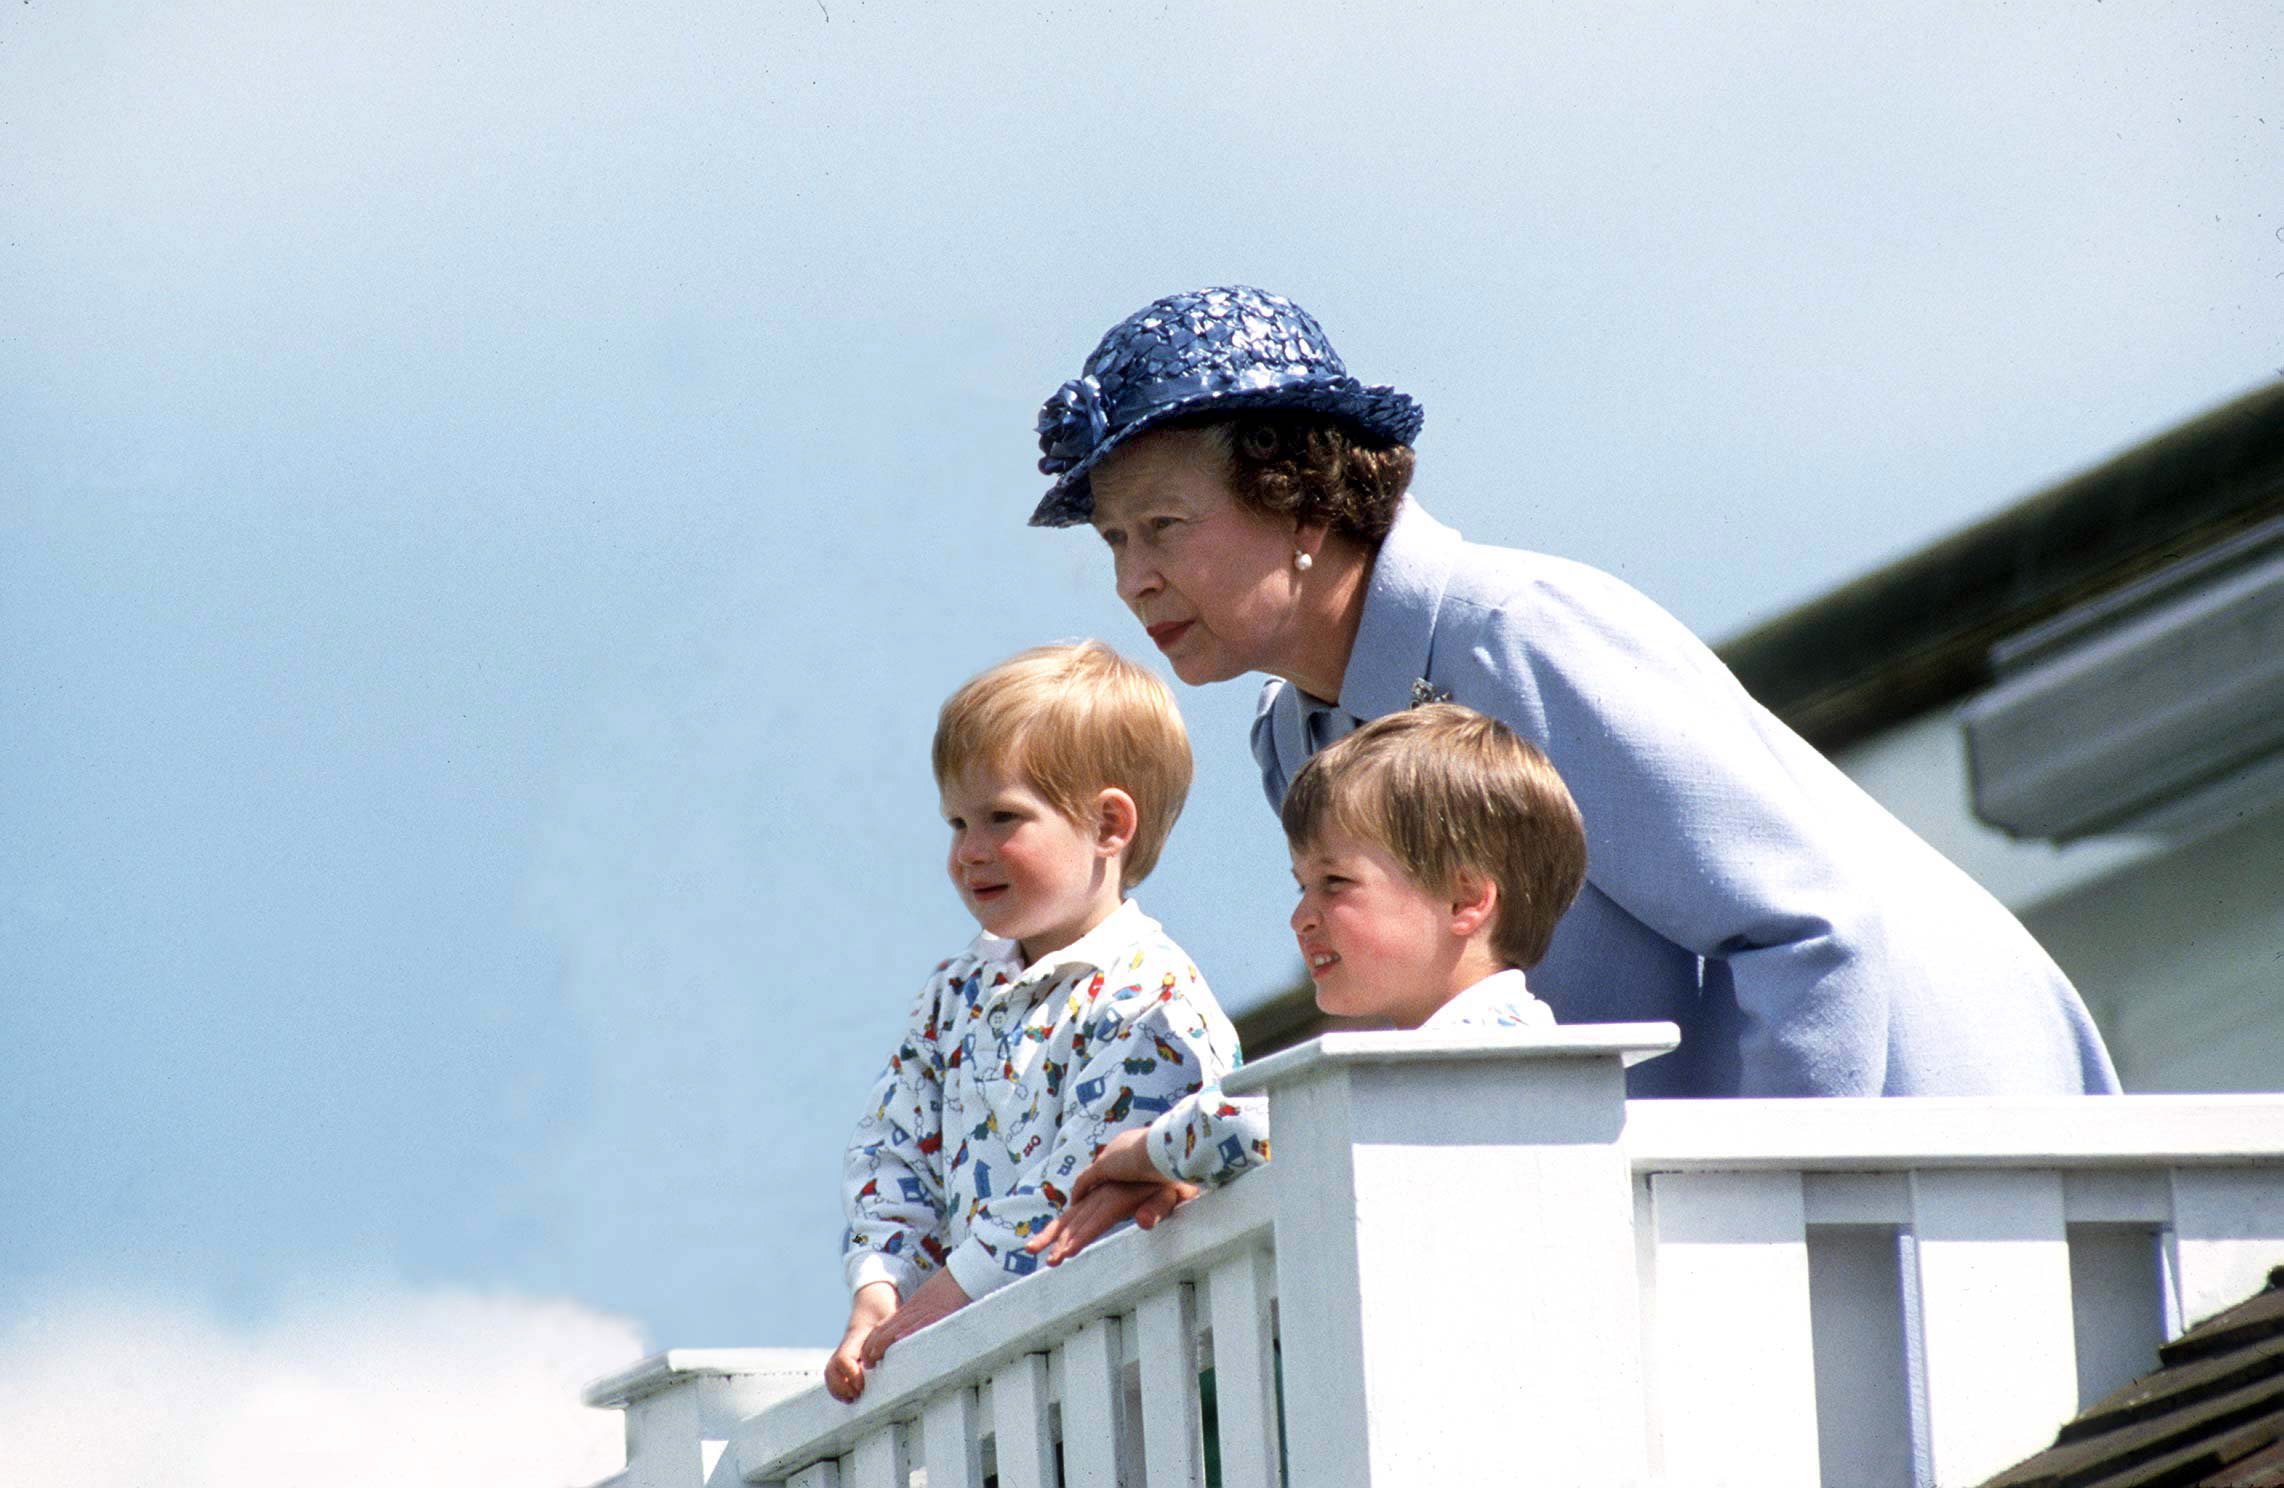 Queen With Prince William & Prince Henry At Polo. June 14, 1987 | Source: Getty Images 